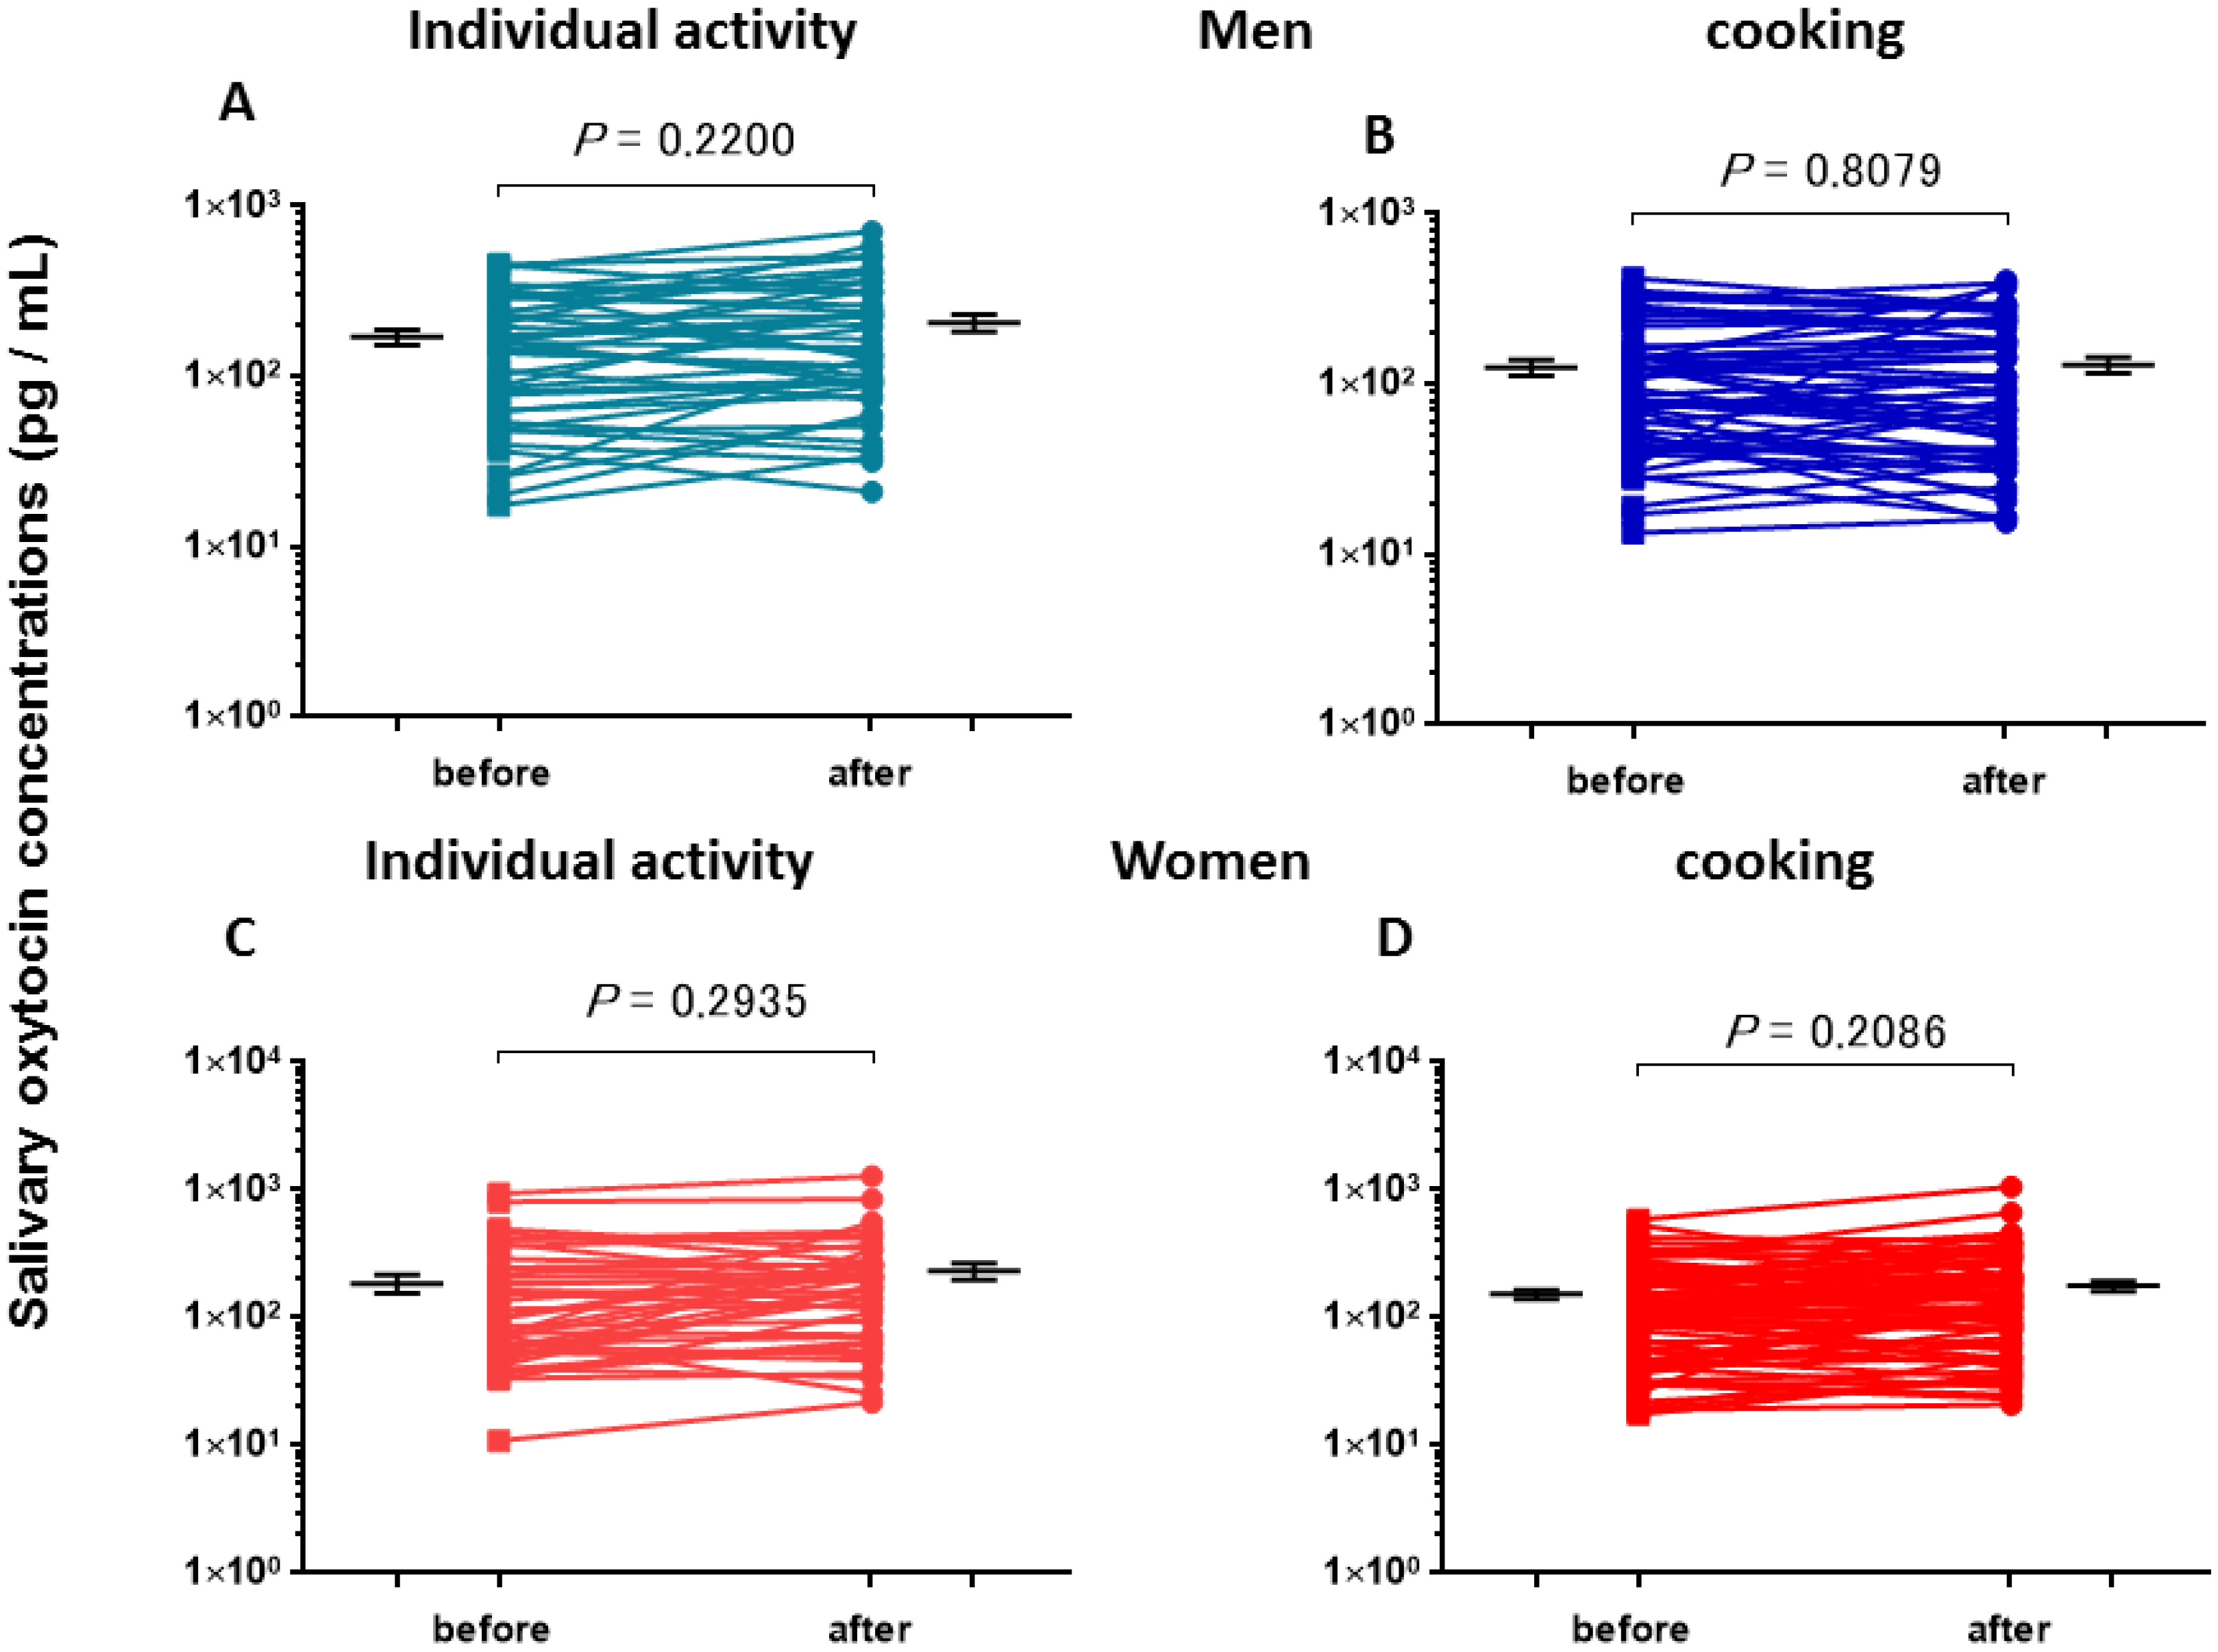 Behavioral Sciences Free Full-Text Sex Differences in Salivary Oxytocin and Cortisol Concentration Changes during Cooking in a Small Group